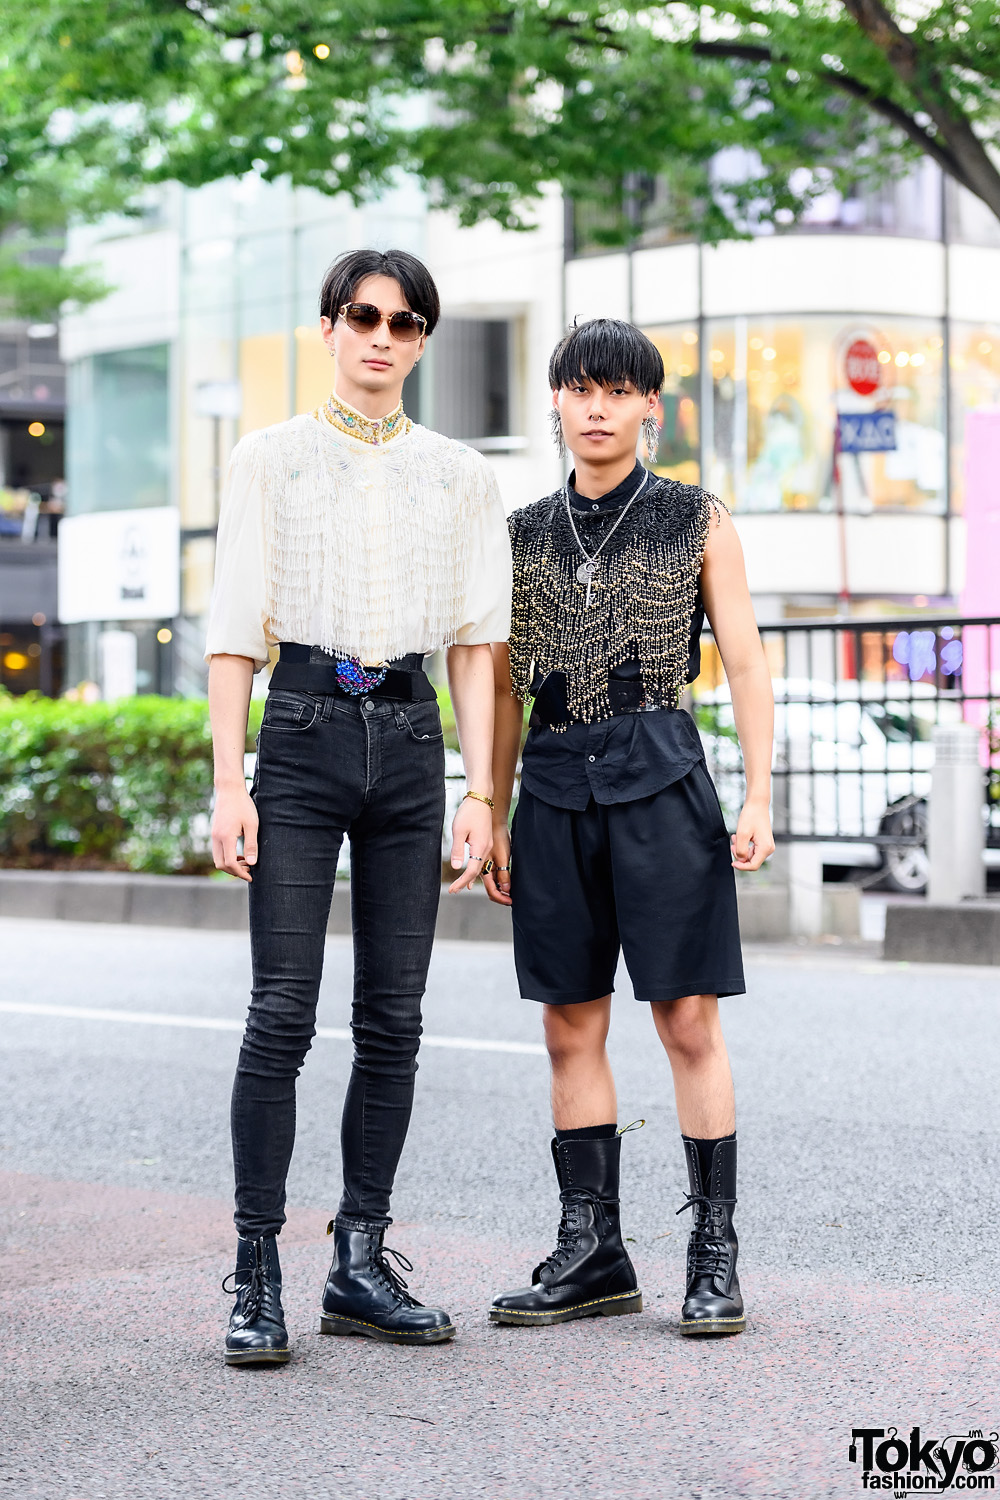 Tokyo Menswear Styles w/ Fringed Bead Tops, Dior Sunglasses, Toga Bead Earrings, Intricate Beaded Shirt, Fendi, Wide Belts & Dr. Martens Boots